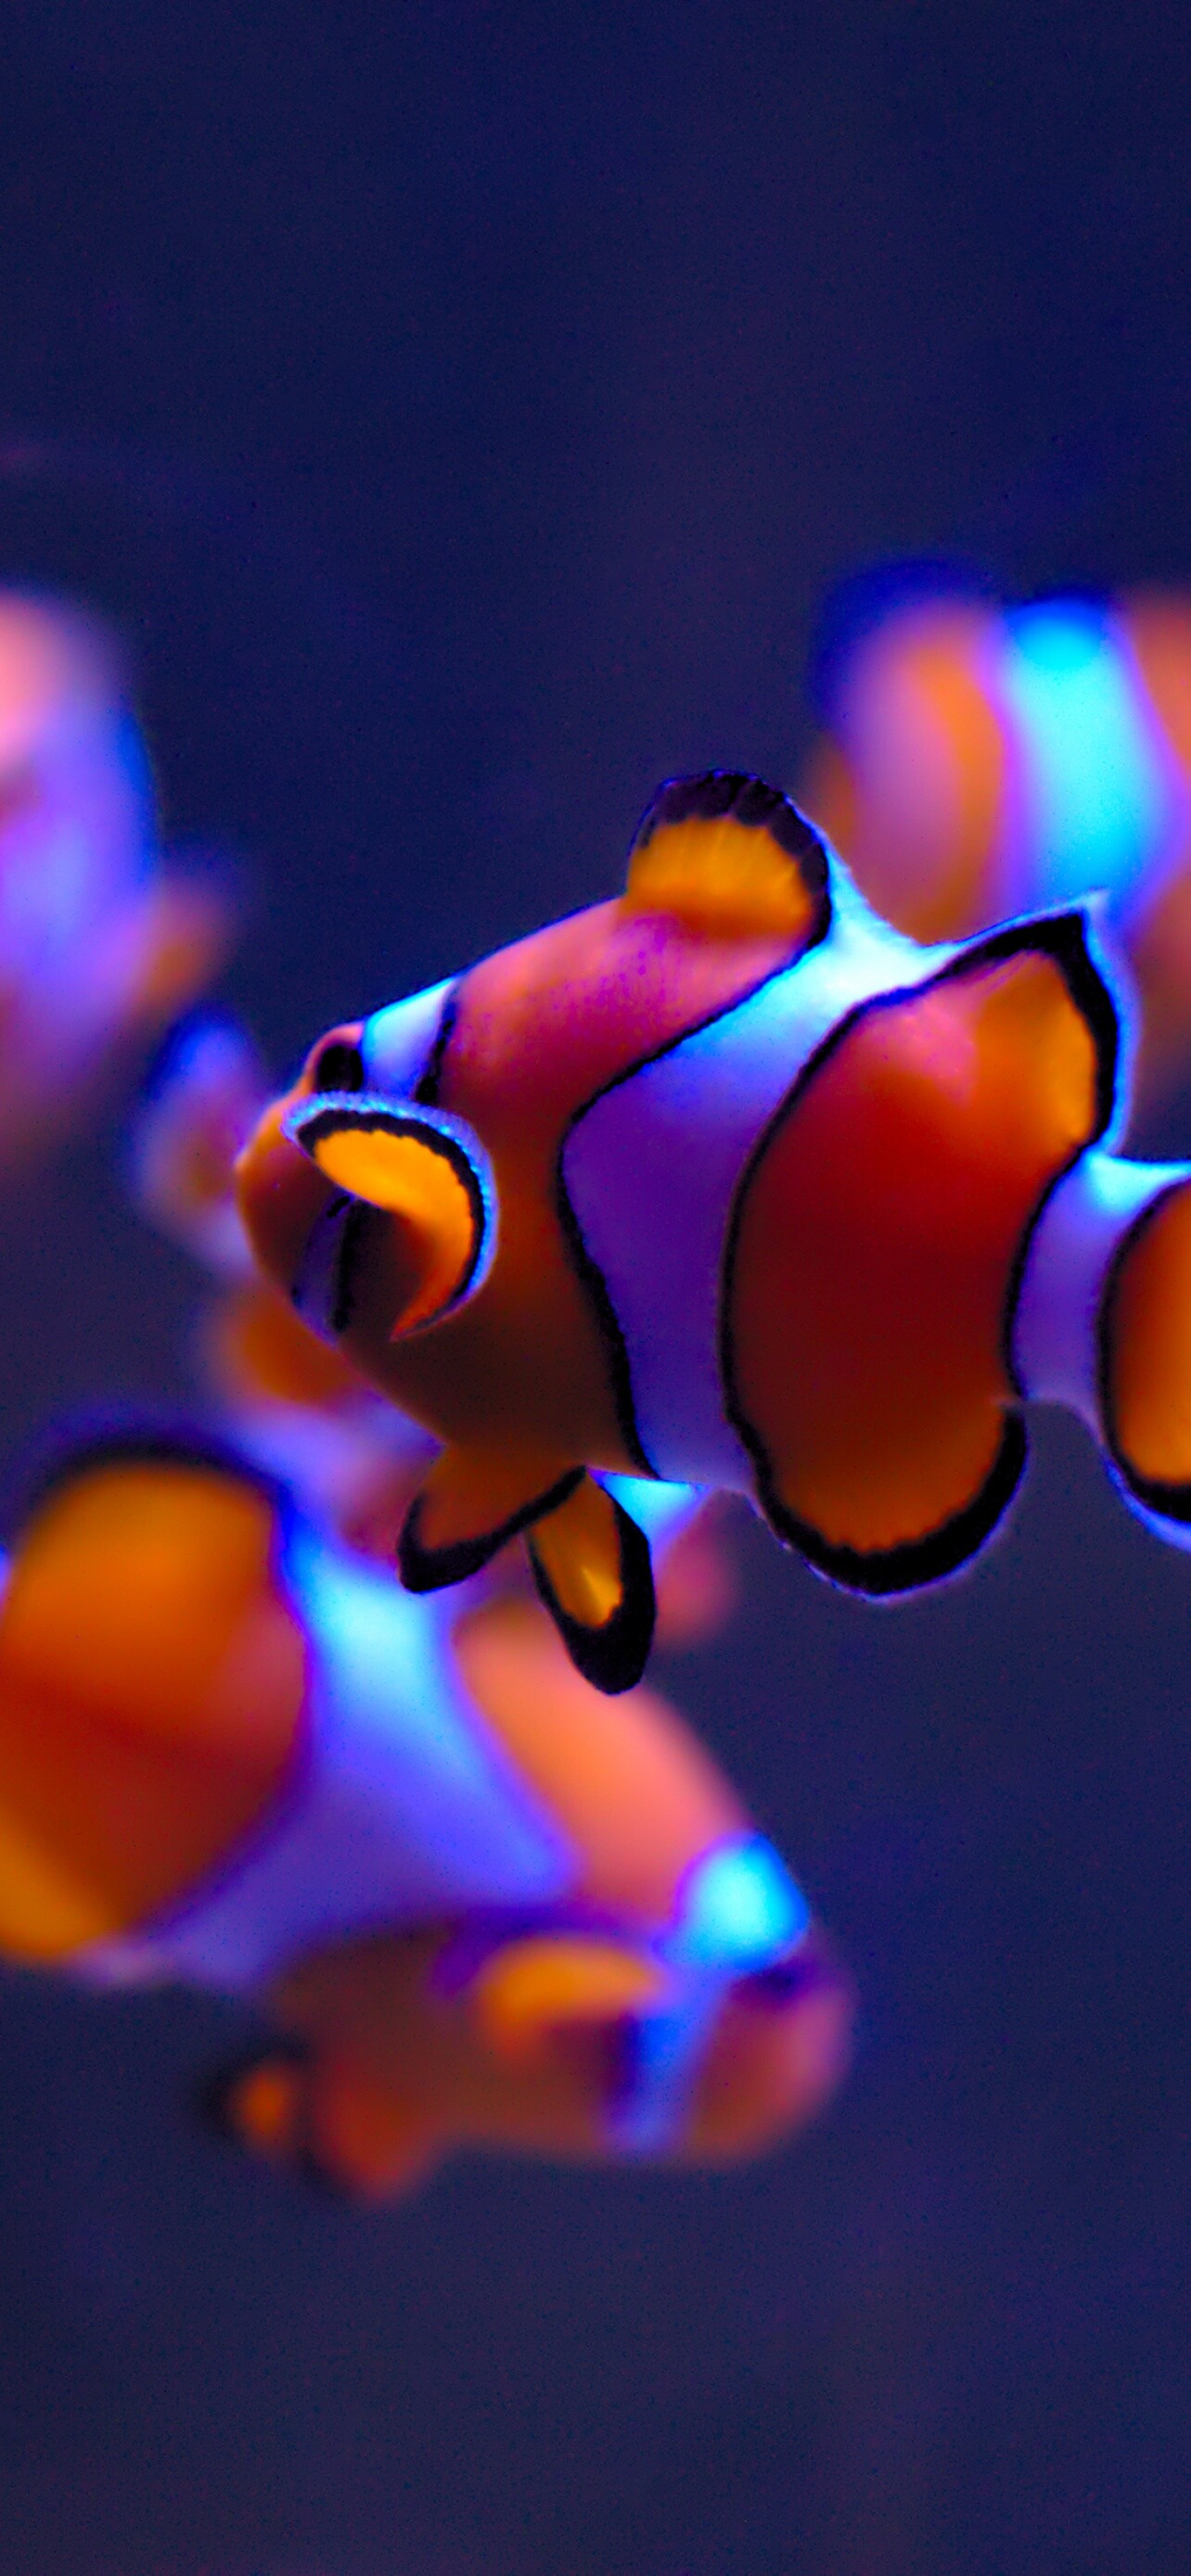 Fish: Clownfish, Endemic to the warmer waters of the Indian Ocean. 1290x2780 HD Wallpaper.